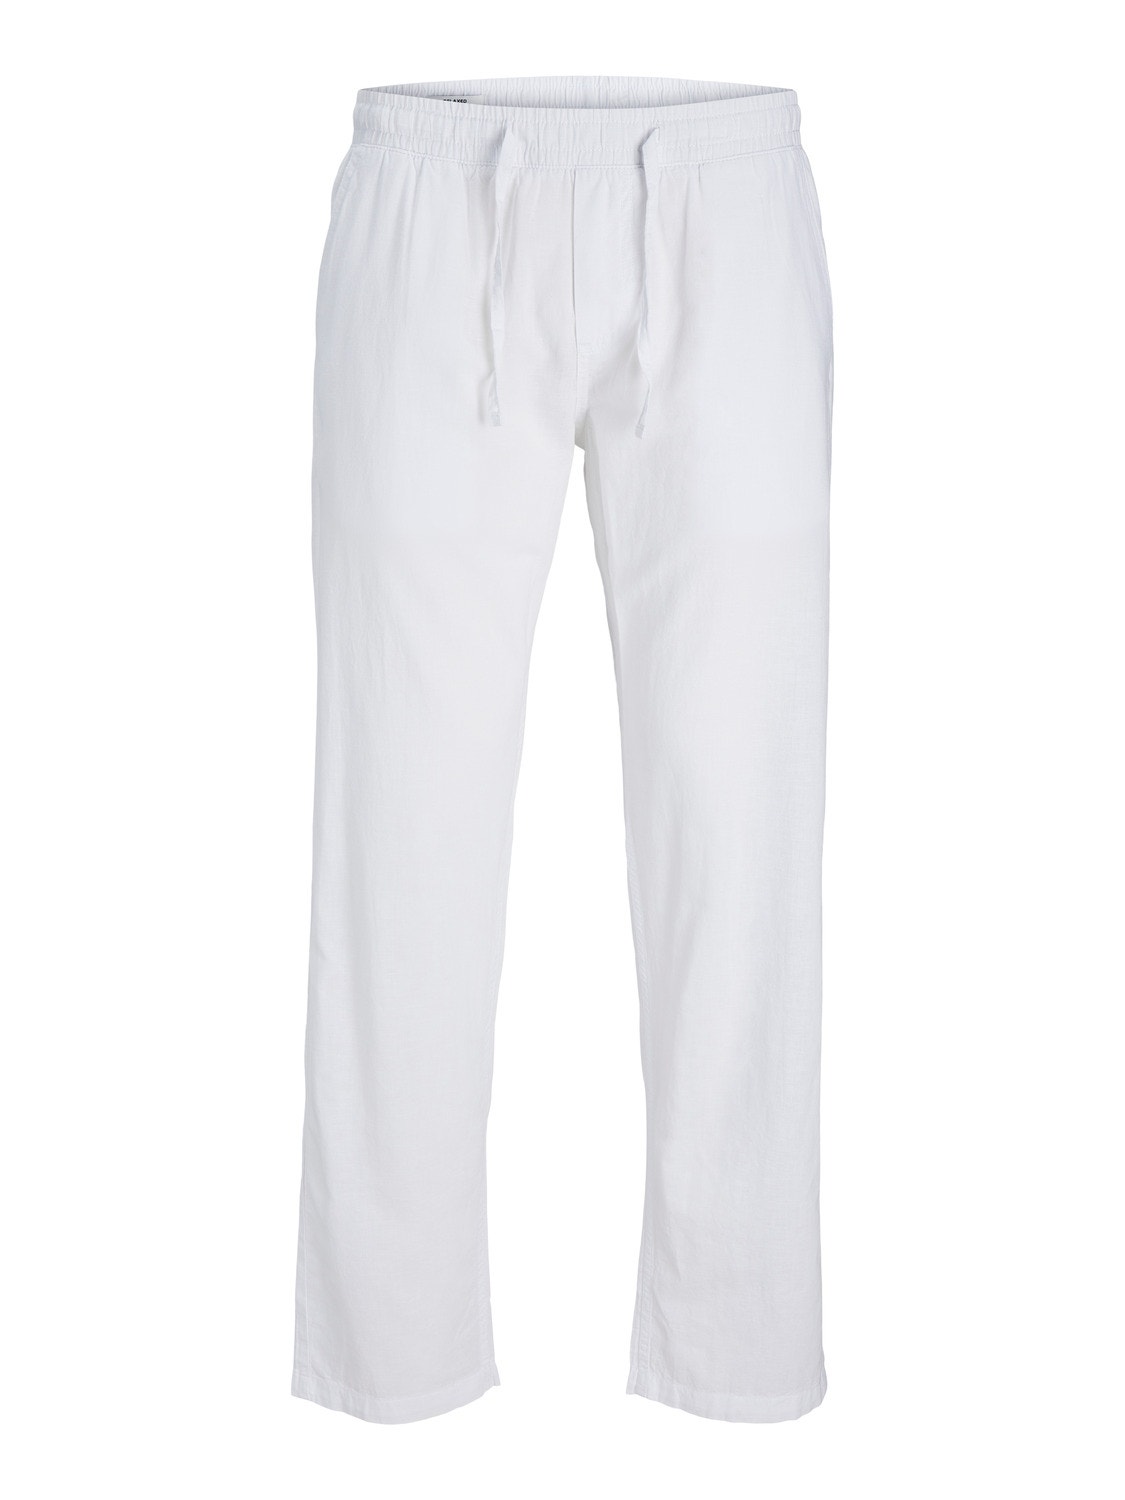 Jack & Jones Relaxed Fit Classic trousers -Bright White - 12248606